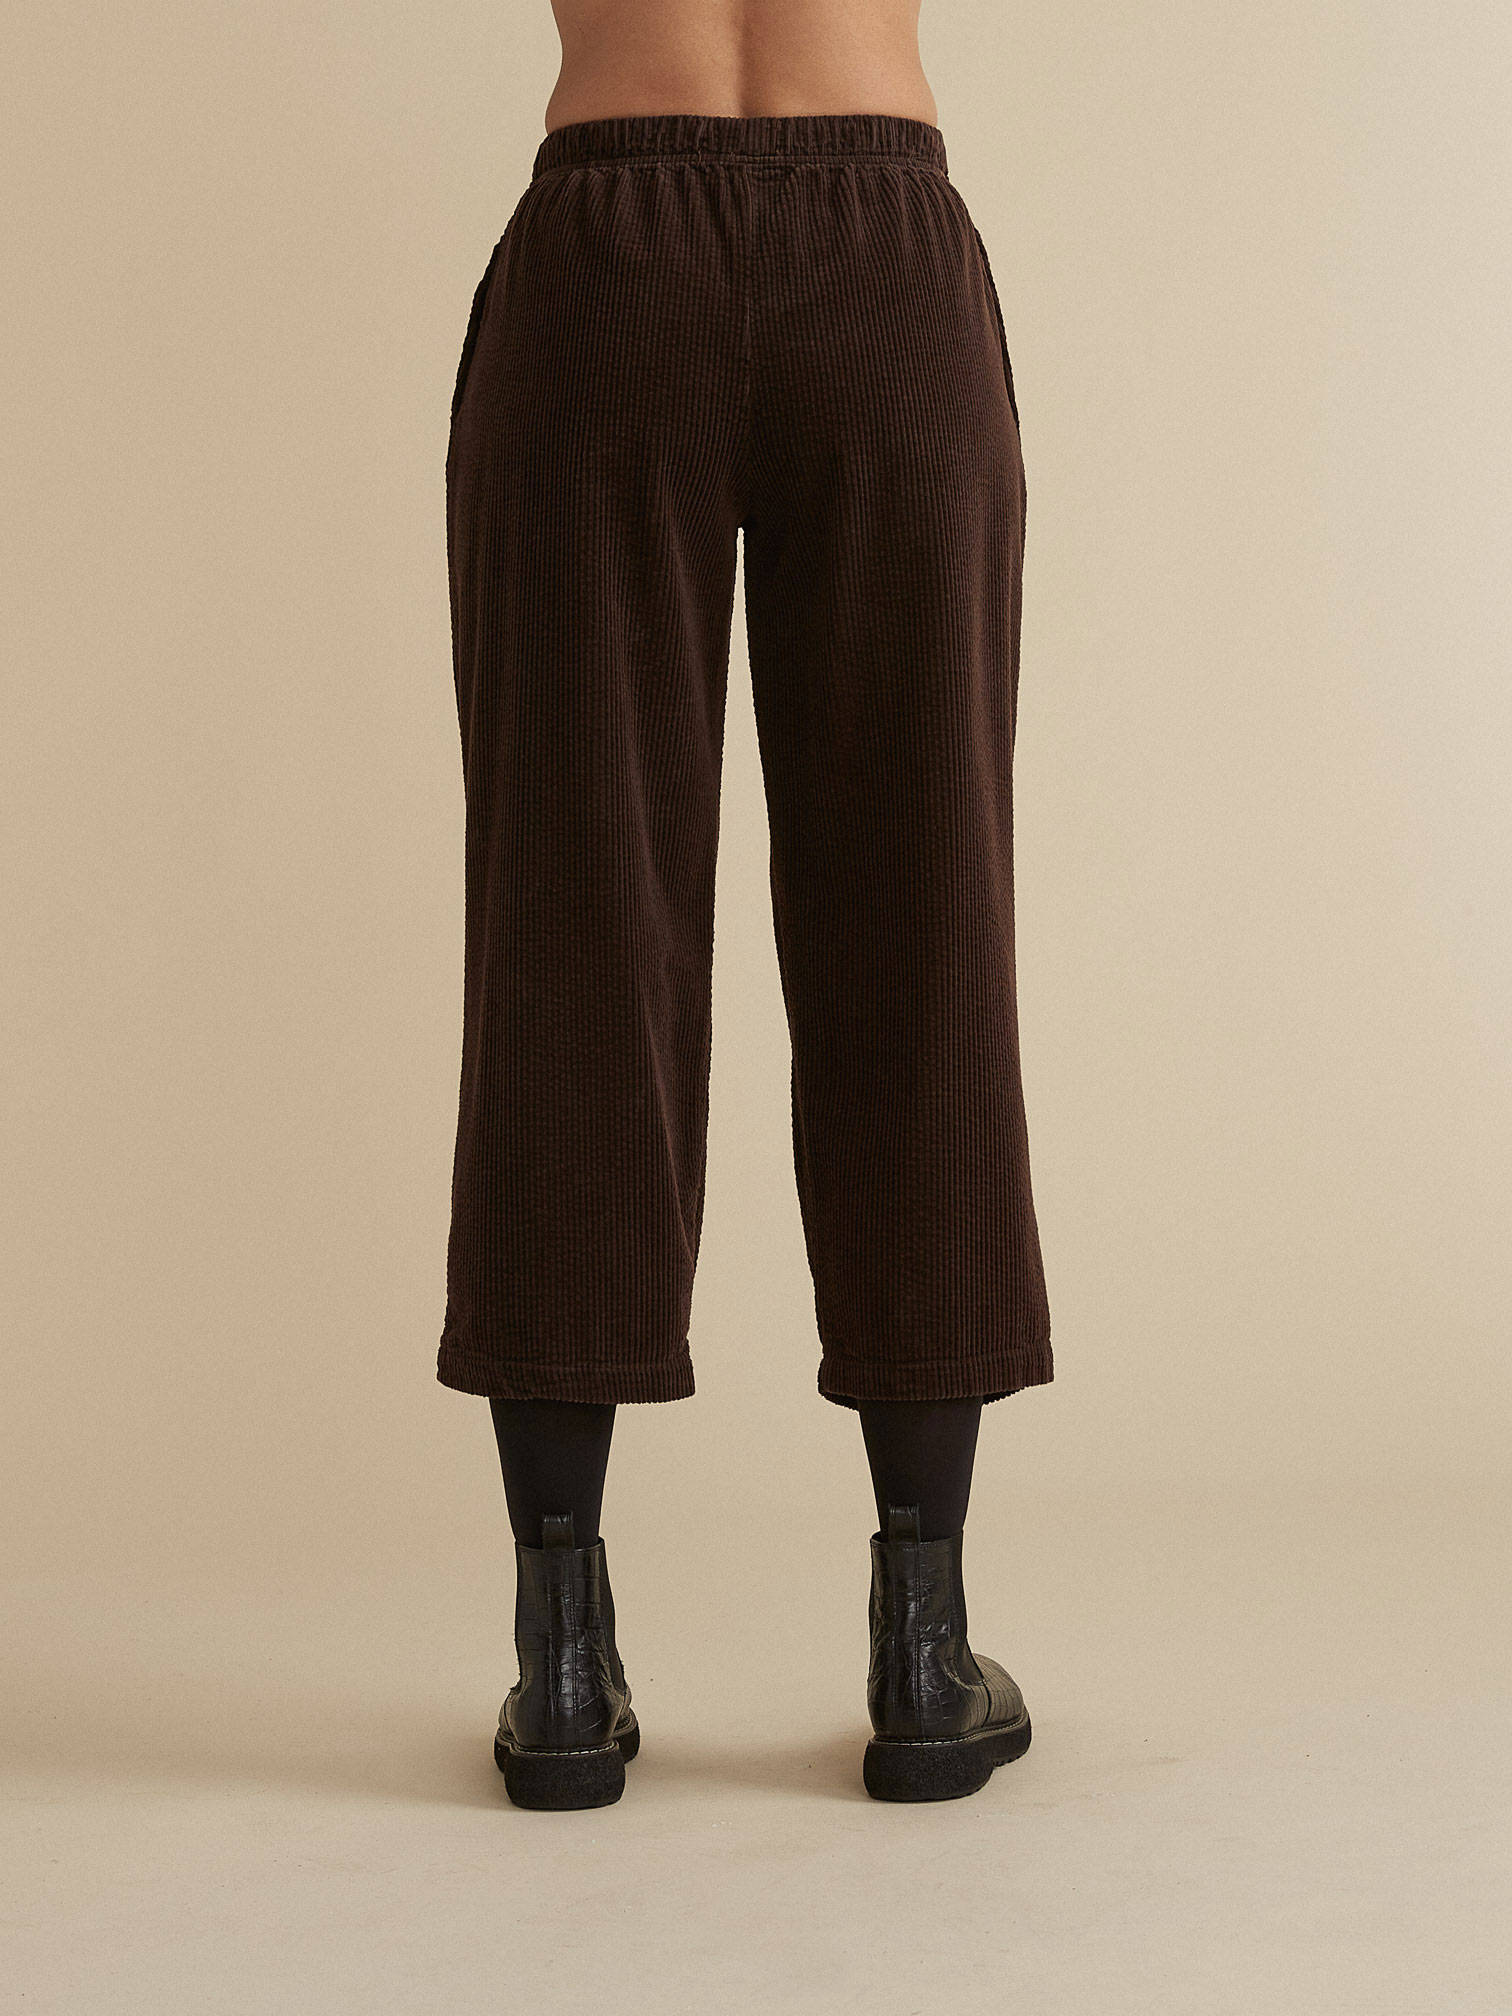 Double Tuck Pant